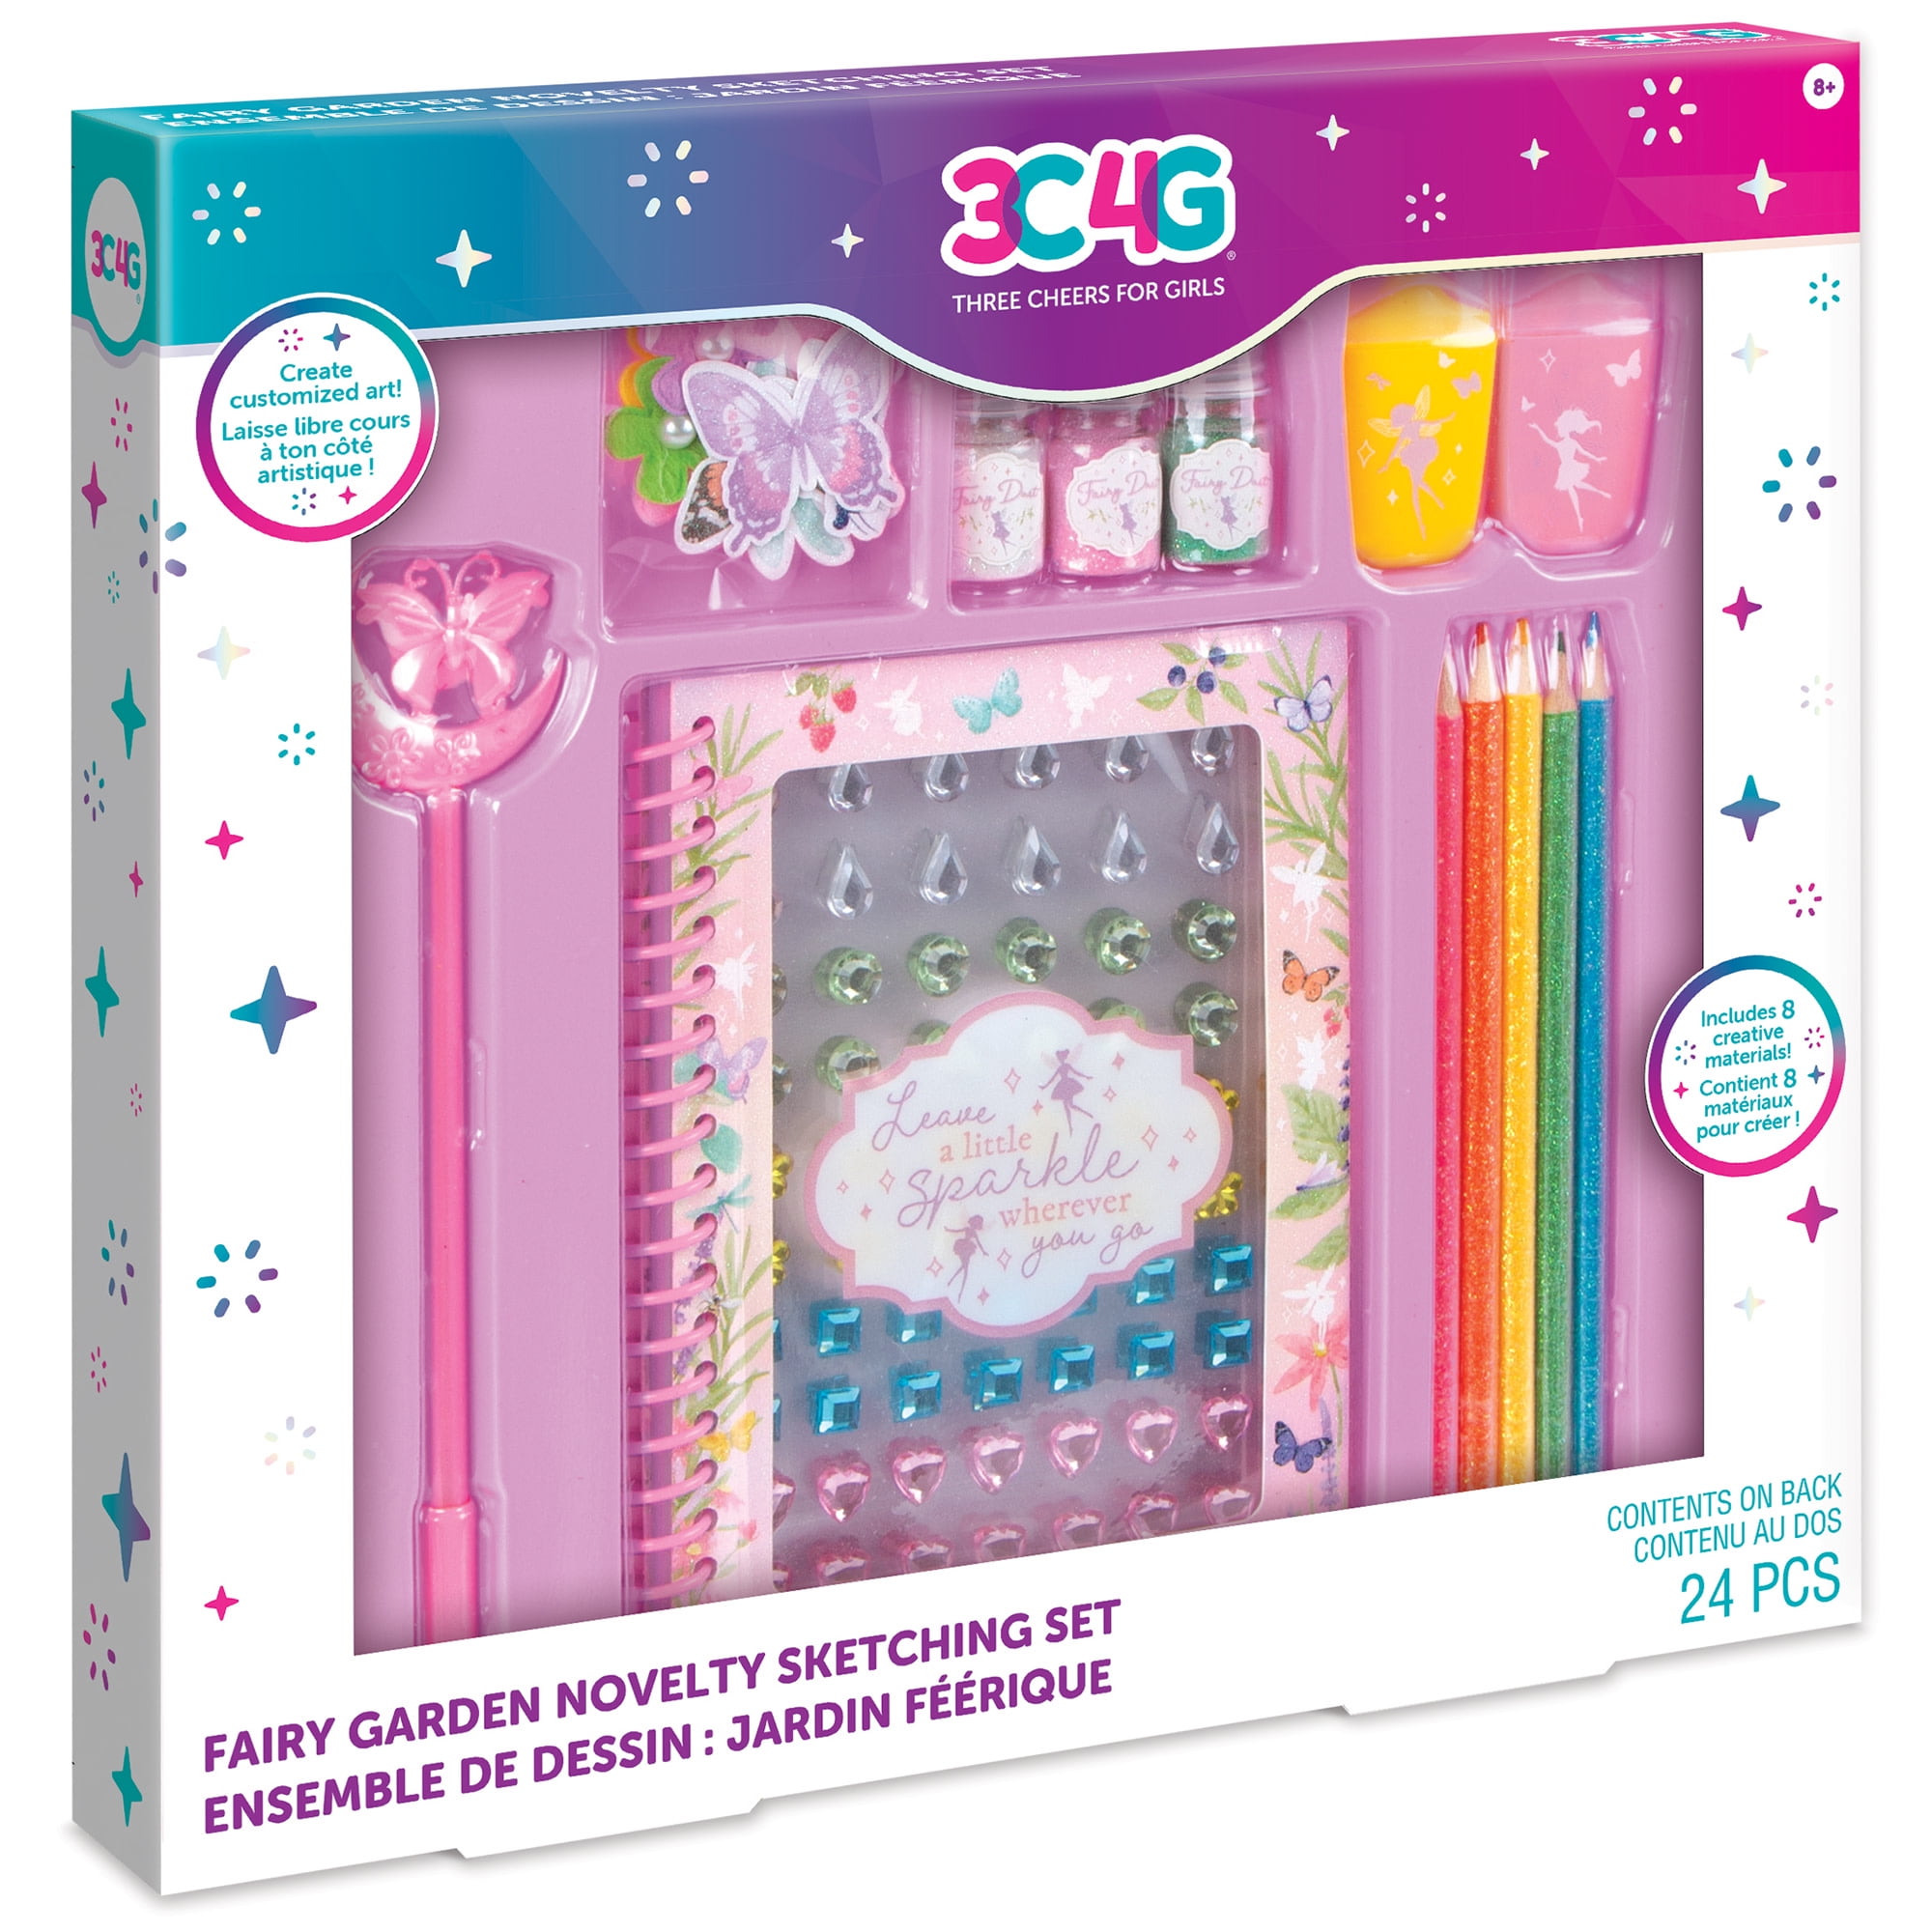 Hot Bee Art Set for Kids, Color Set with 208 Pcs Art Supplies, Pink Coloring Kit for Girls 4-6, Perfect Christmas Gifts Drawing Arts & Crafts Kit for